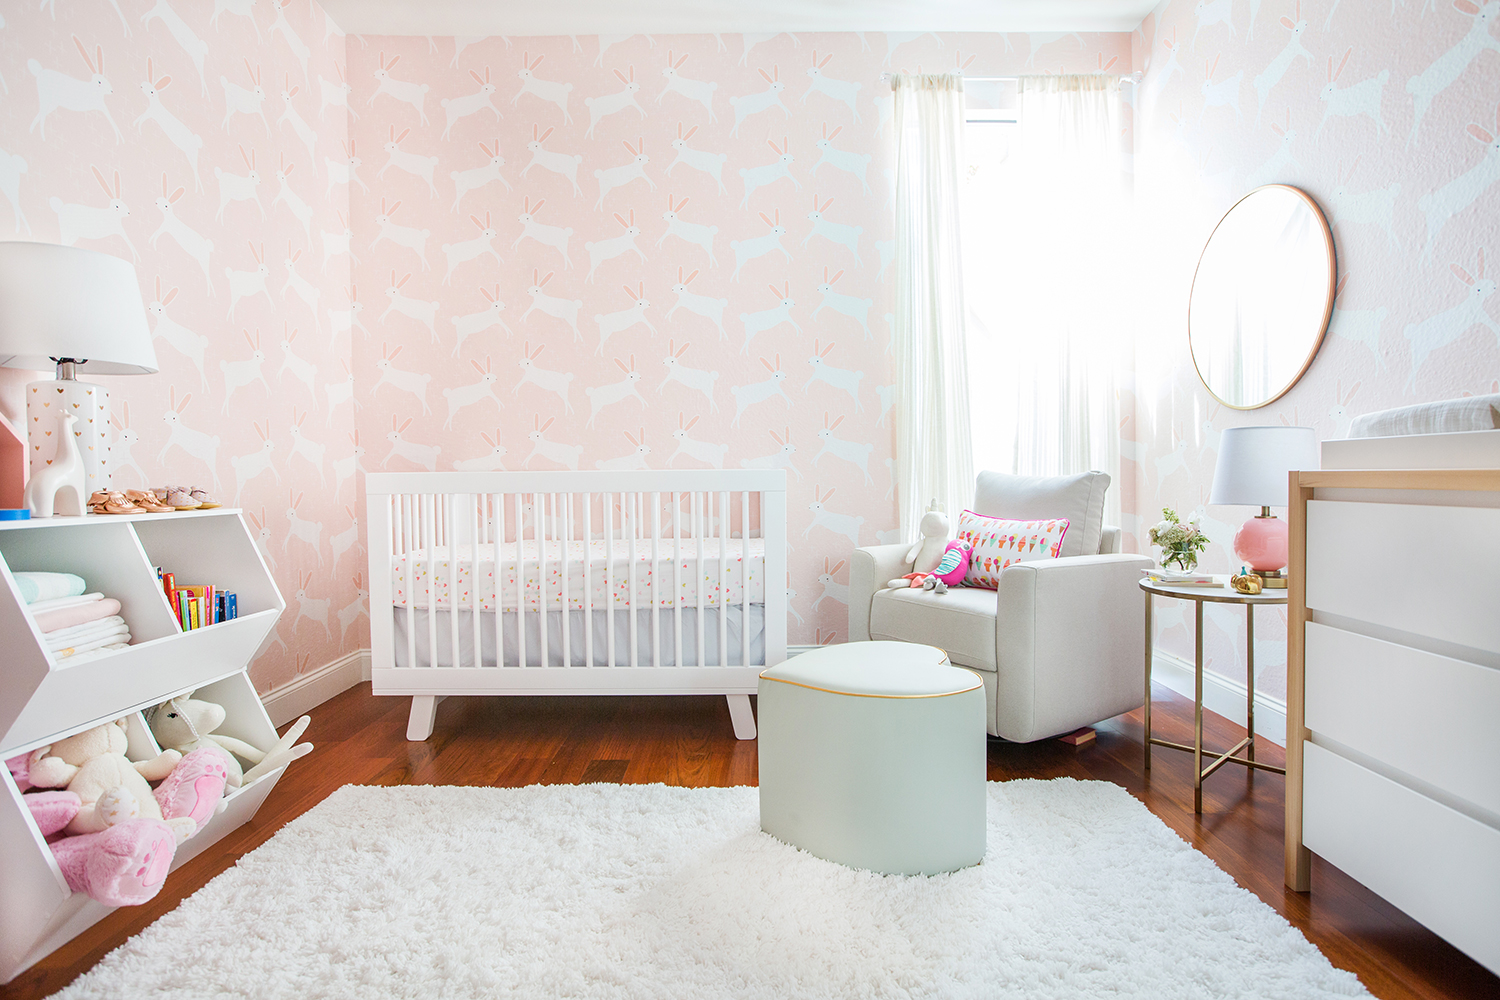 Pink And White Nursery With Bunny Wallpaper - Nursery Room Themes - HD Wallpaper 